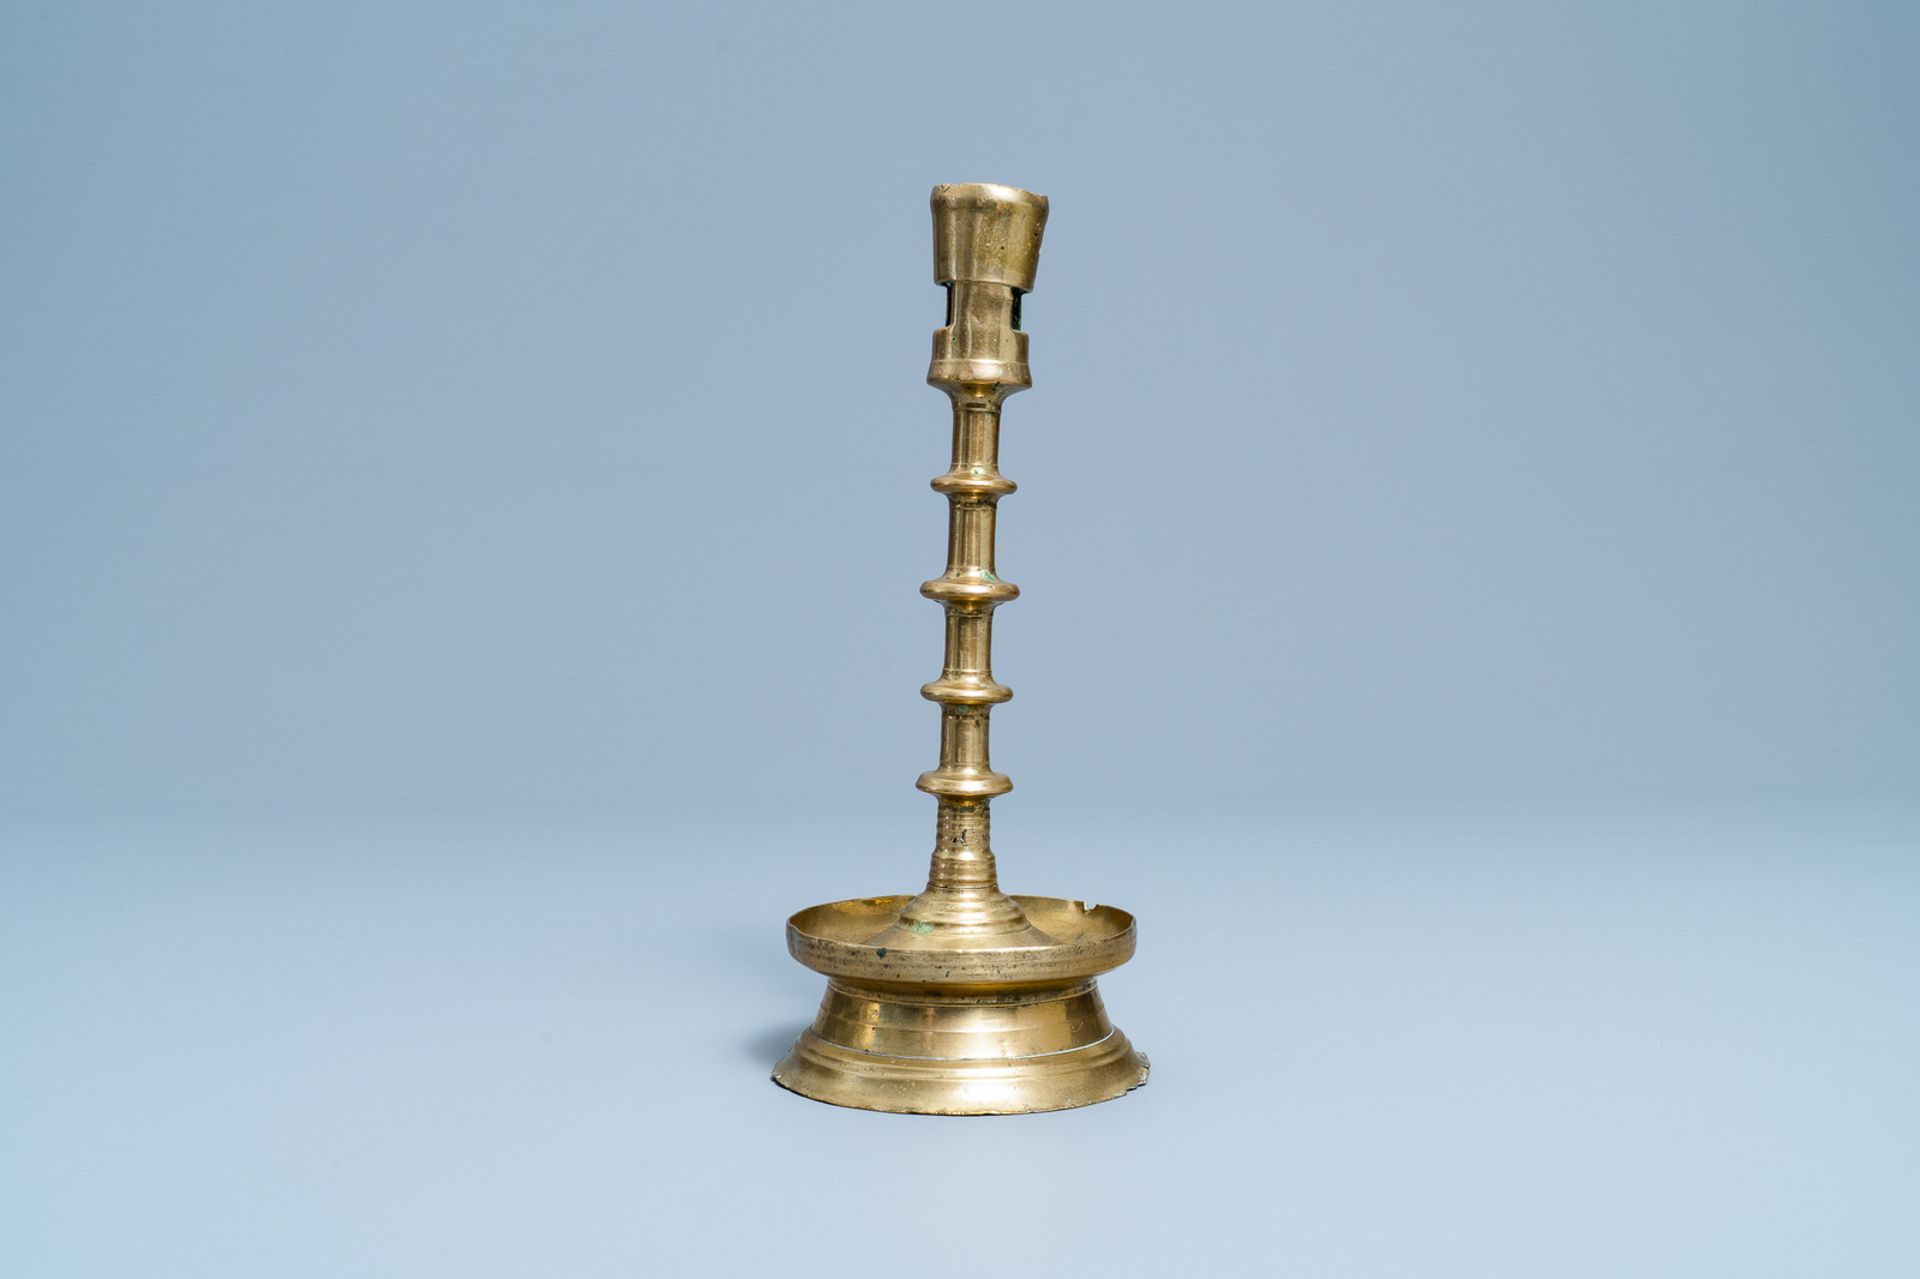 A Flemish or Dutch knotted bronze candlestick, 15th C. - Image 4 of 6